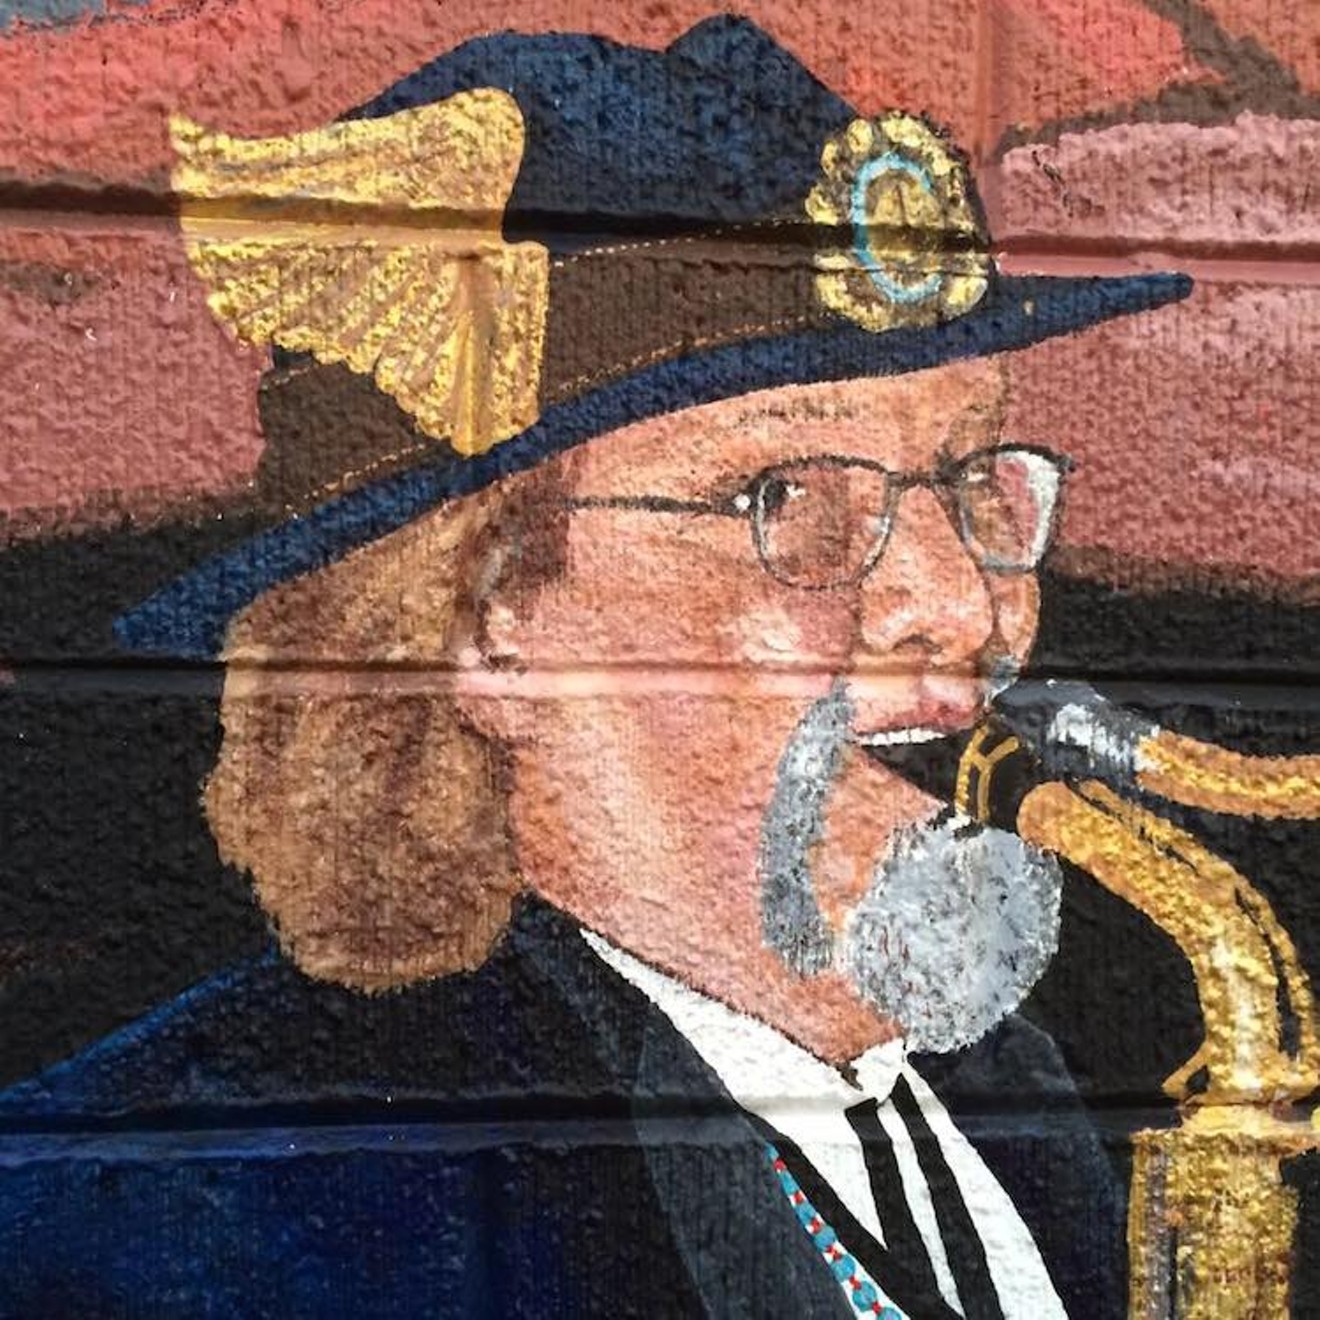 A mural of Jeffrey Barnes is painted outside Juicy Pig Barbecue in Denton.